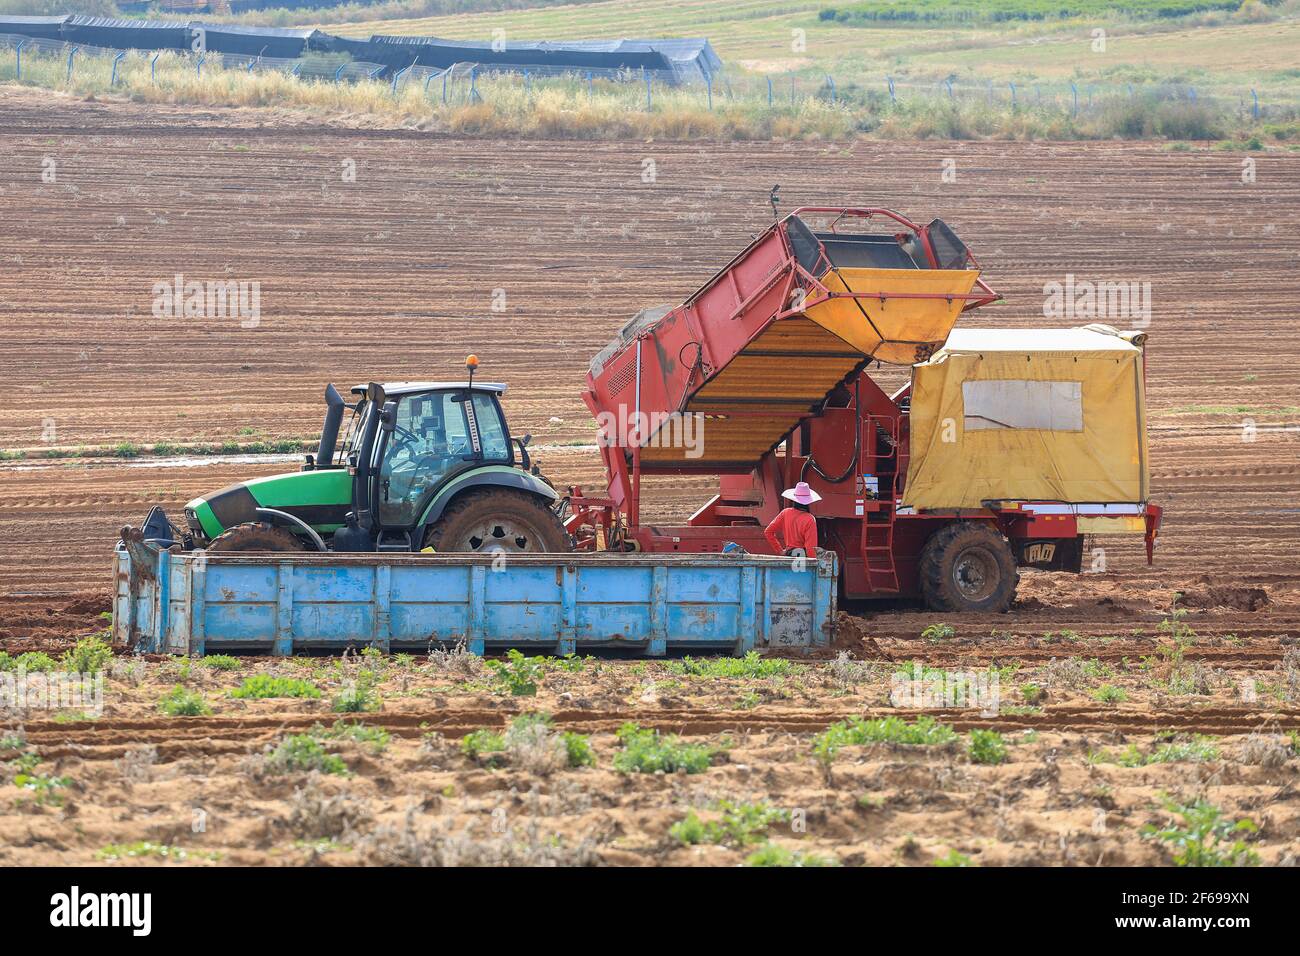 Tractor with a trailer, unload potatoes into a large container. Stock Photo